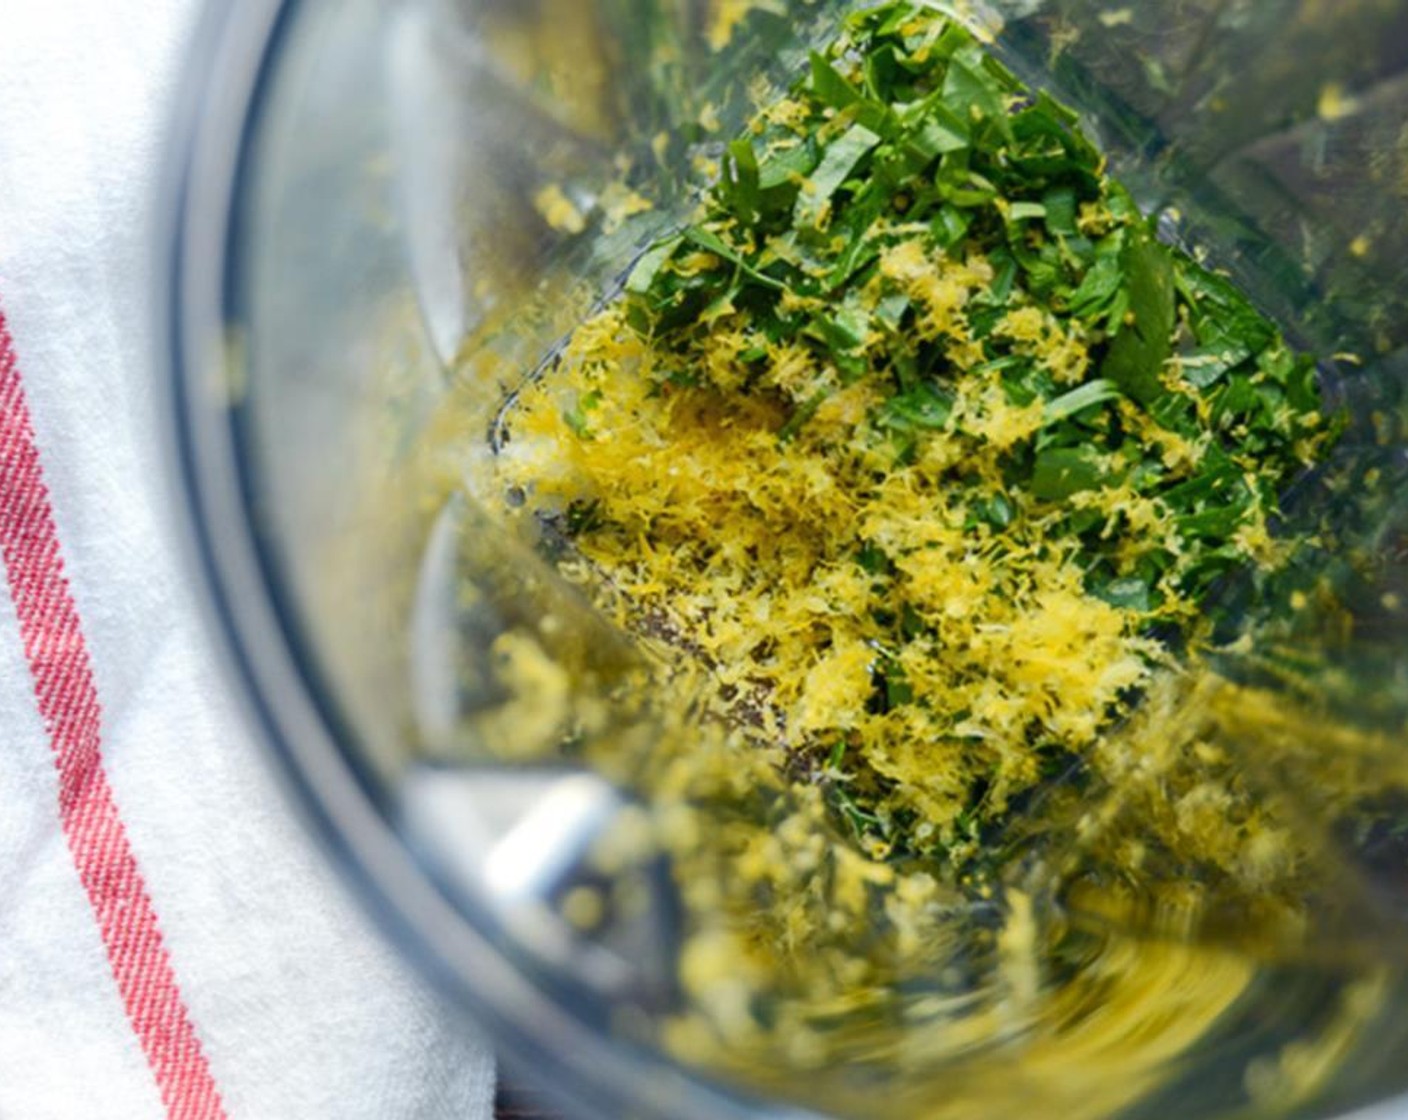 step 3 Add the parsley, basil, garlic and onion to a heavy duty blender. Add the Dry Mustard (1/2 tsp), Salt (1/4 tsp), Ground Black Pepper (1/4 tsp), Mayonnaise (1/2 cup), and the zest of the Lemon (1).